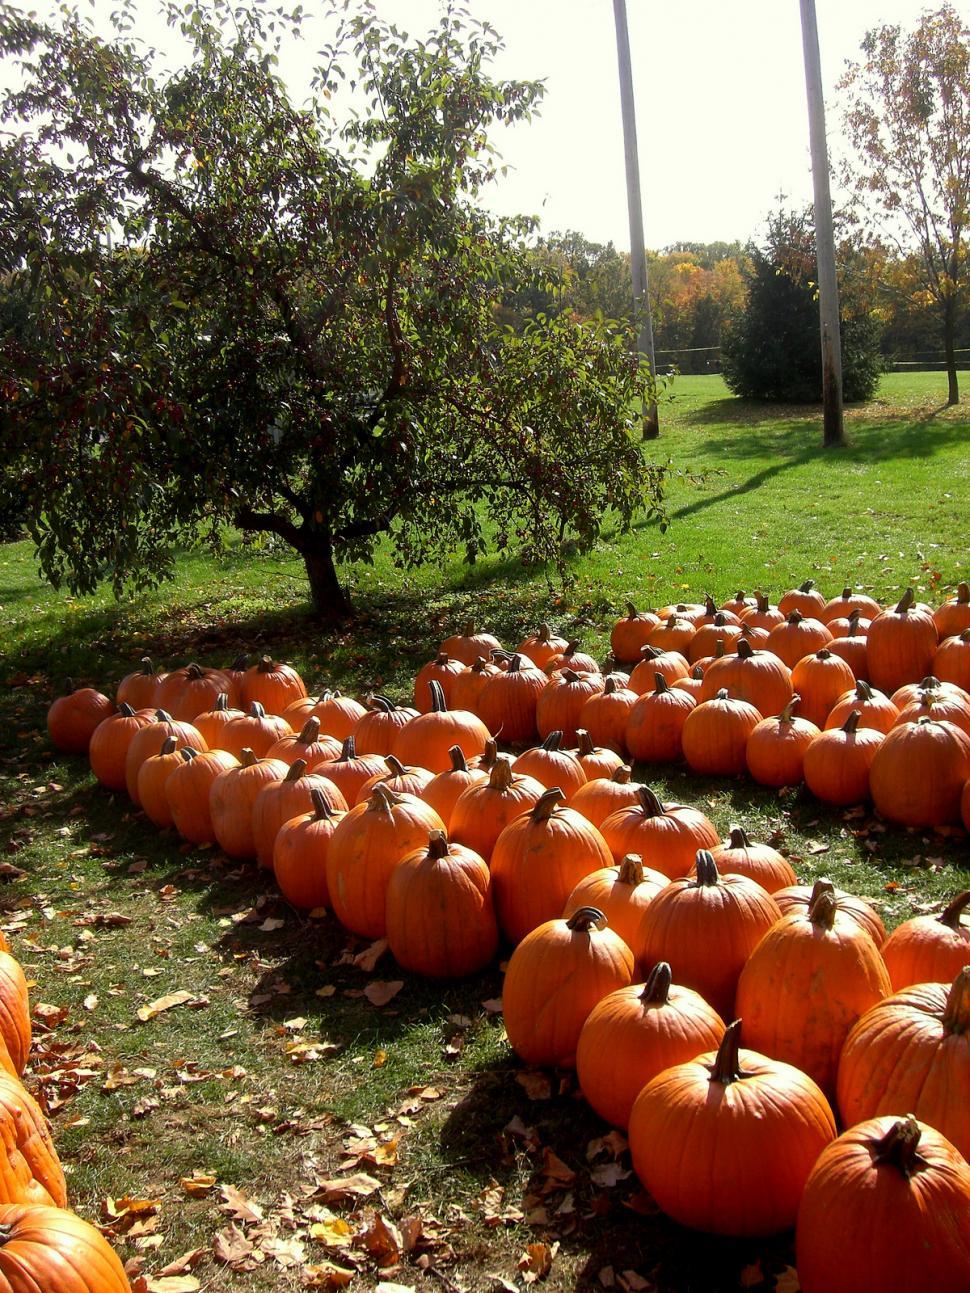 Free Image of A Large Group of Pumpkins Sitting in the Grass 